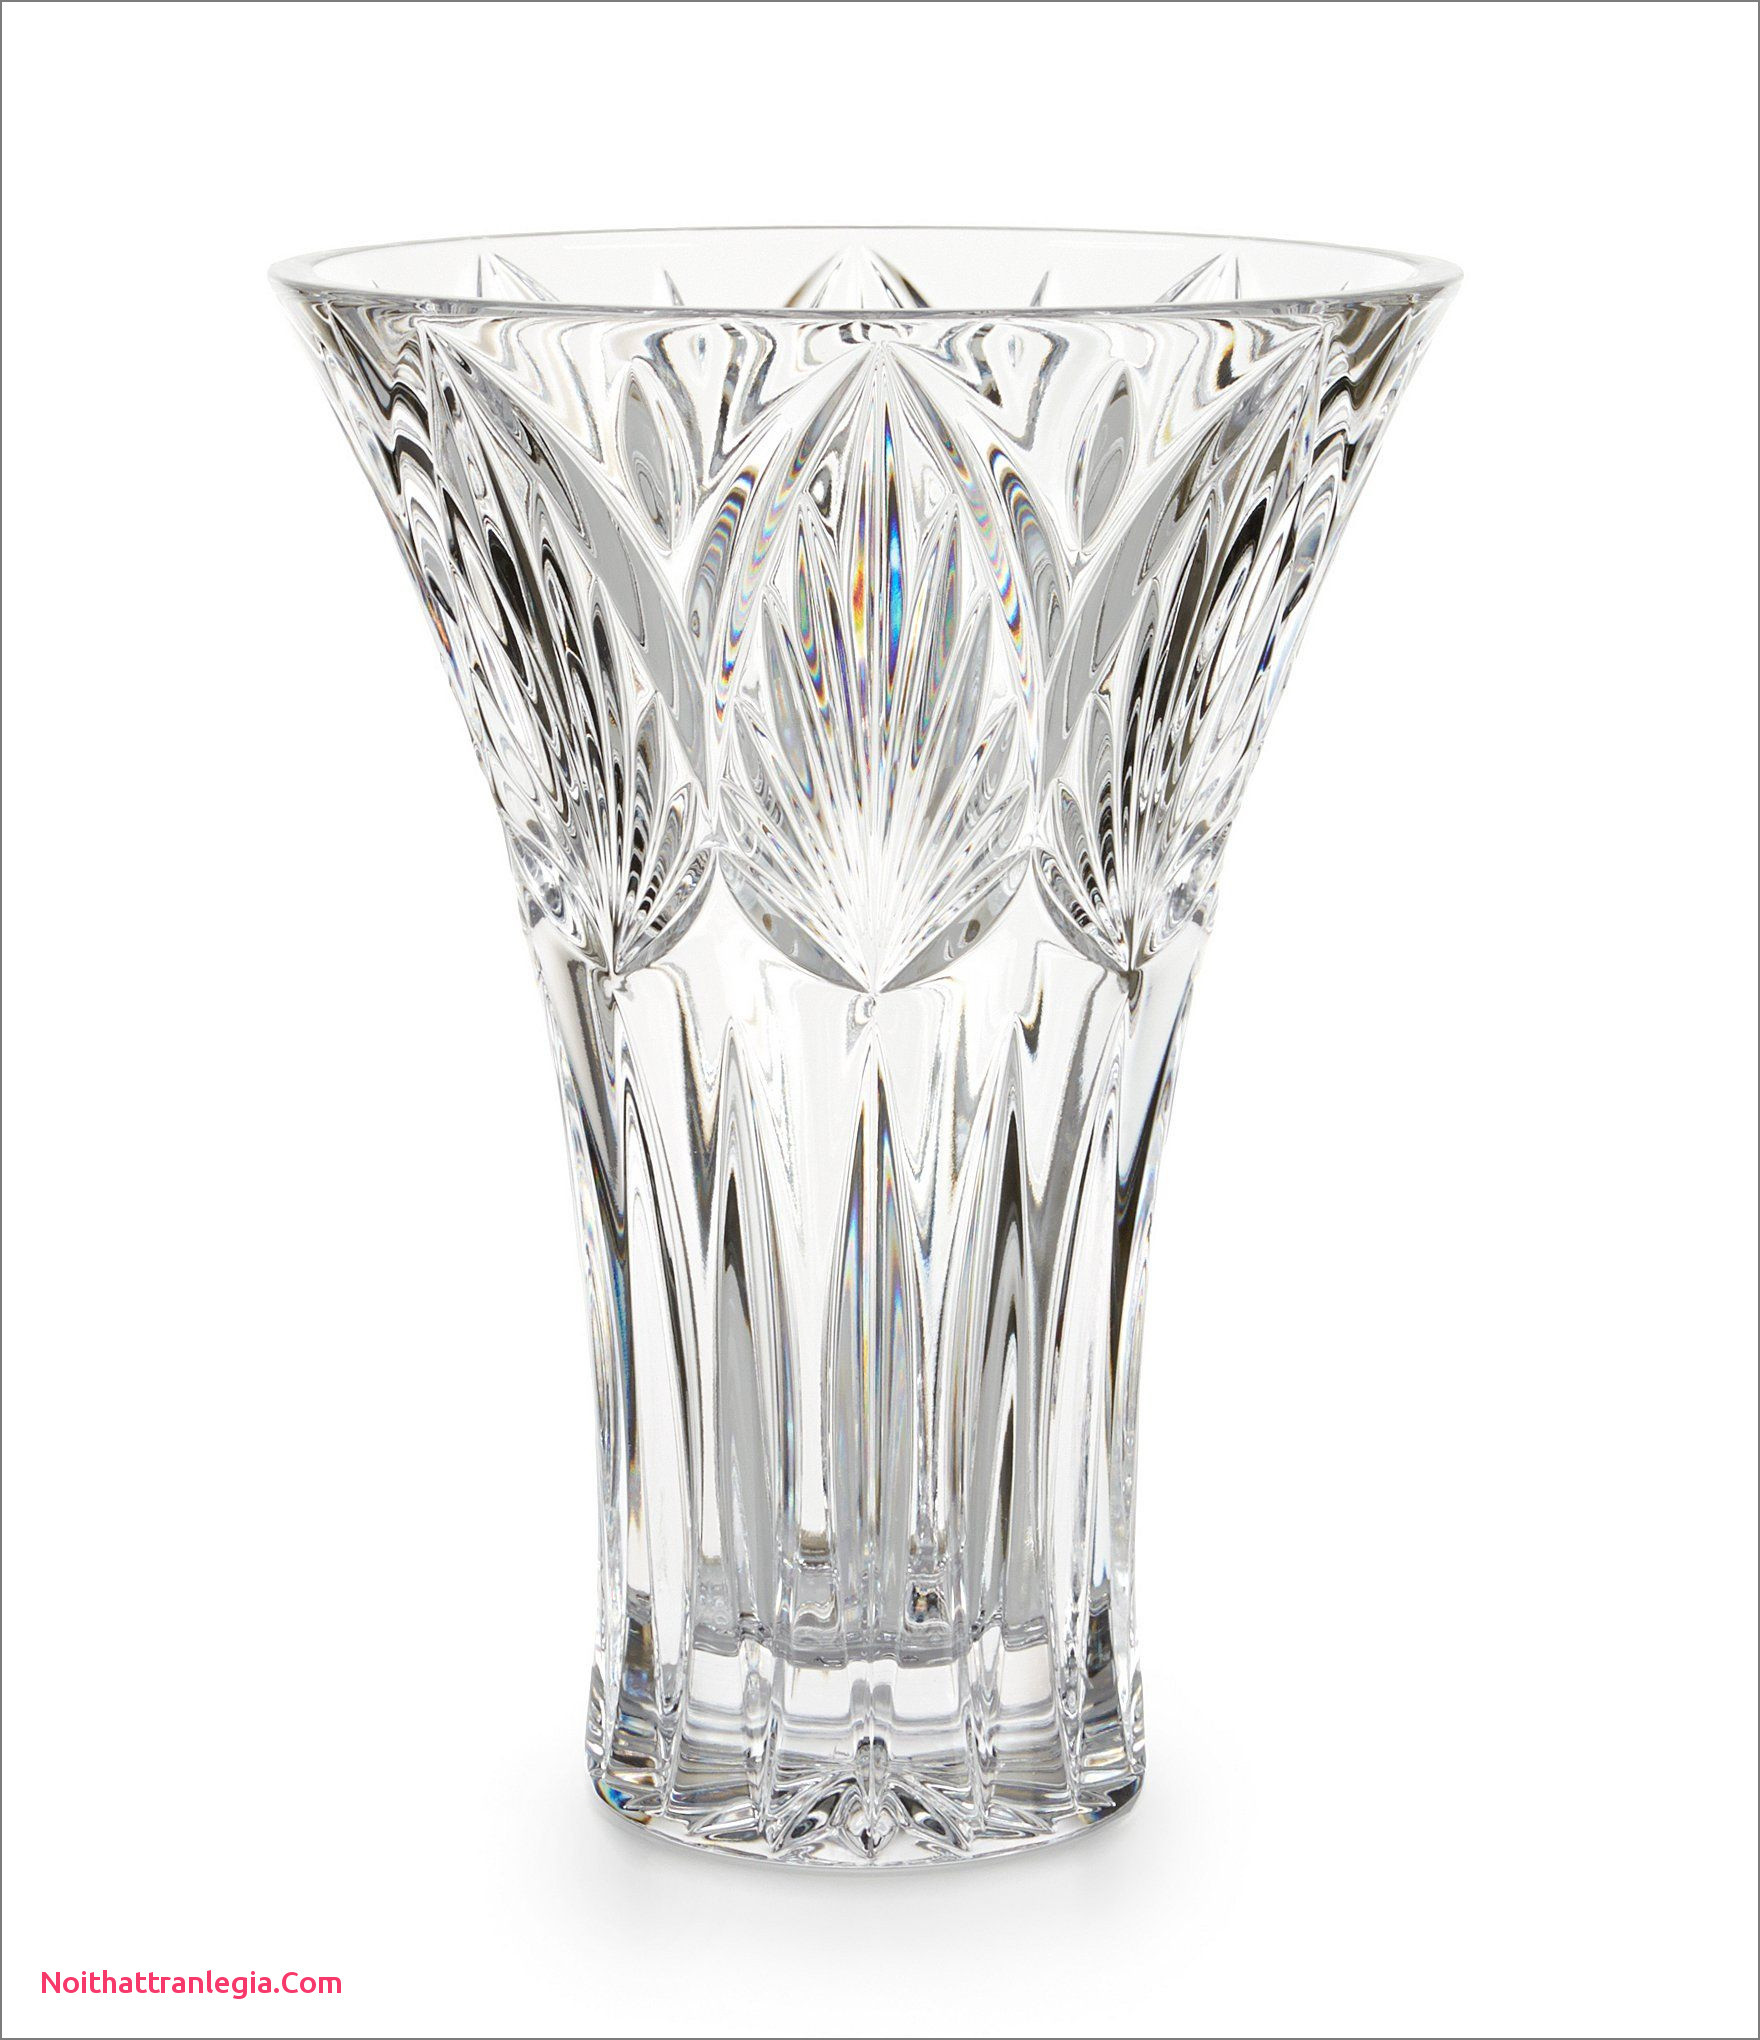 16 Cute Set Of 3 White Vases 2024 free download set of 3 white vases of 20 large waterford crystal vase noithattranlegia vases design with regard to large waterford crystal vase best of waterford westbridge crystal vase of large waterford